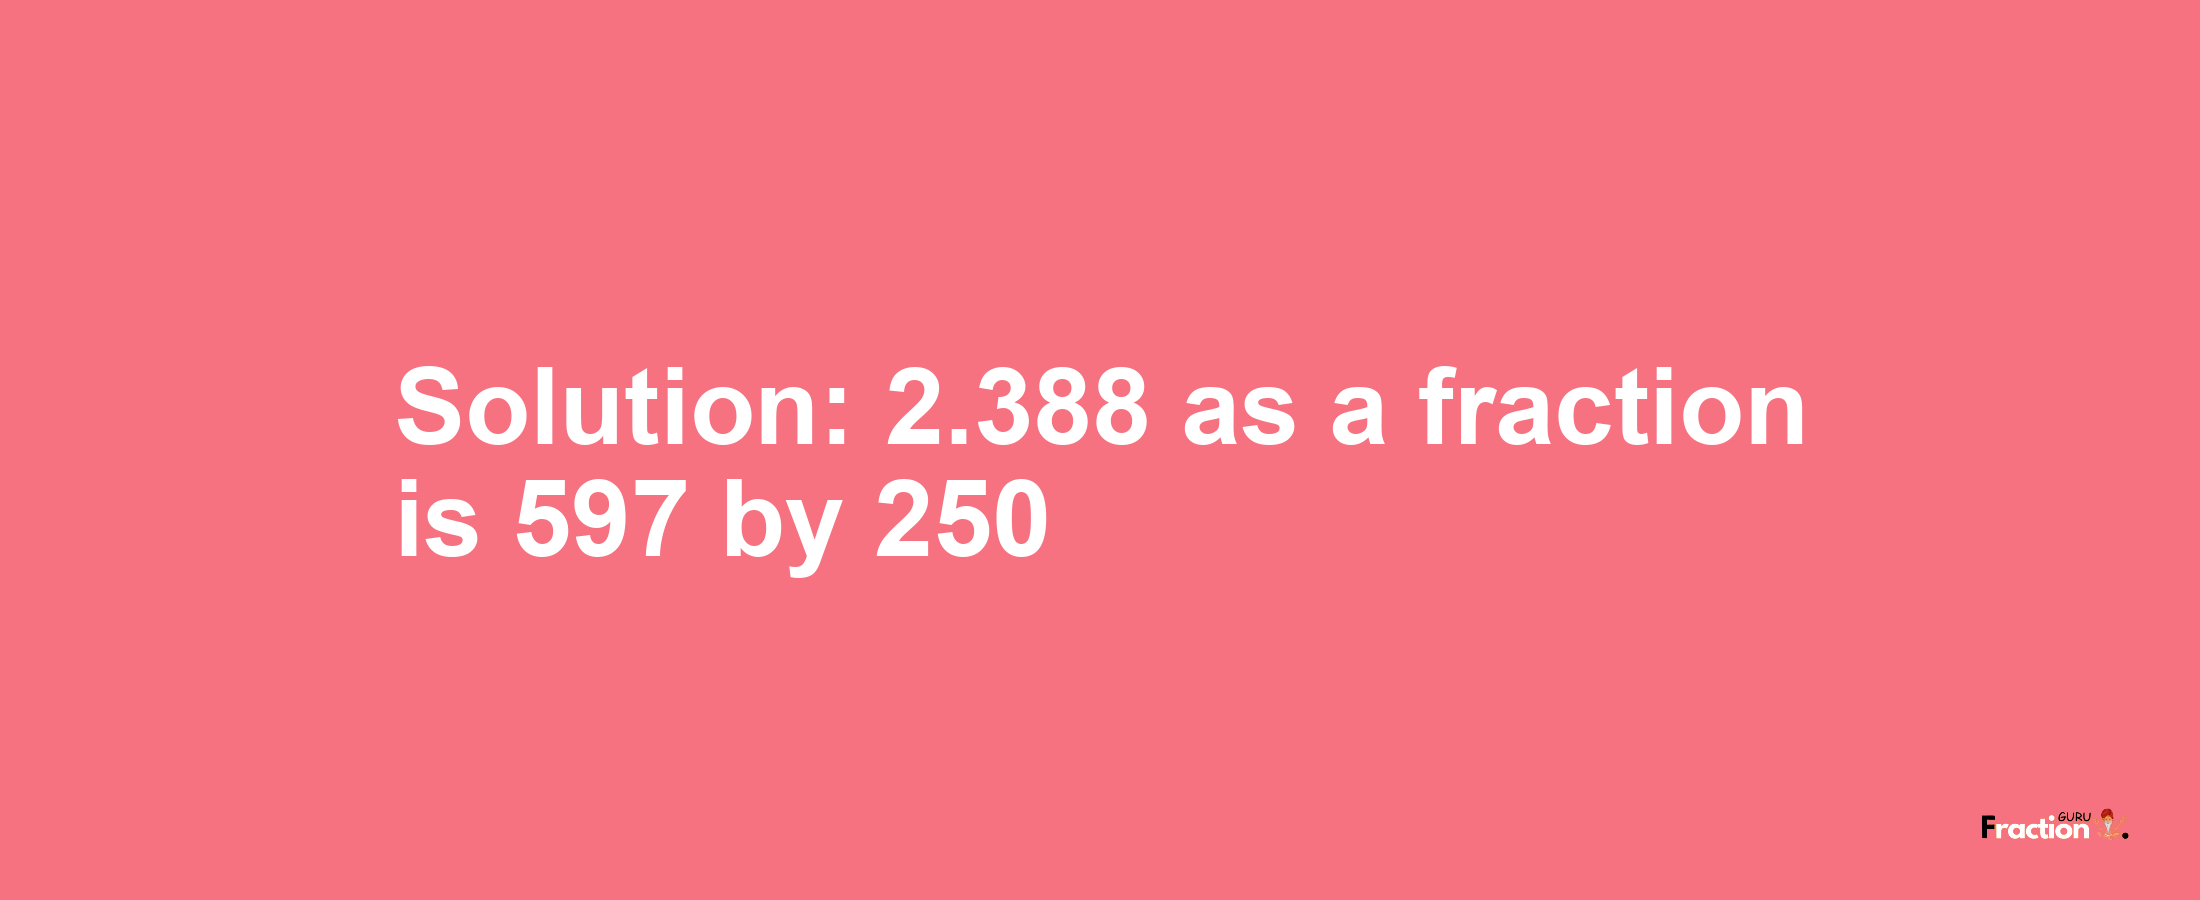 Solution:2.388 as a fraction is 597/250